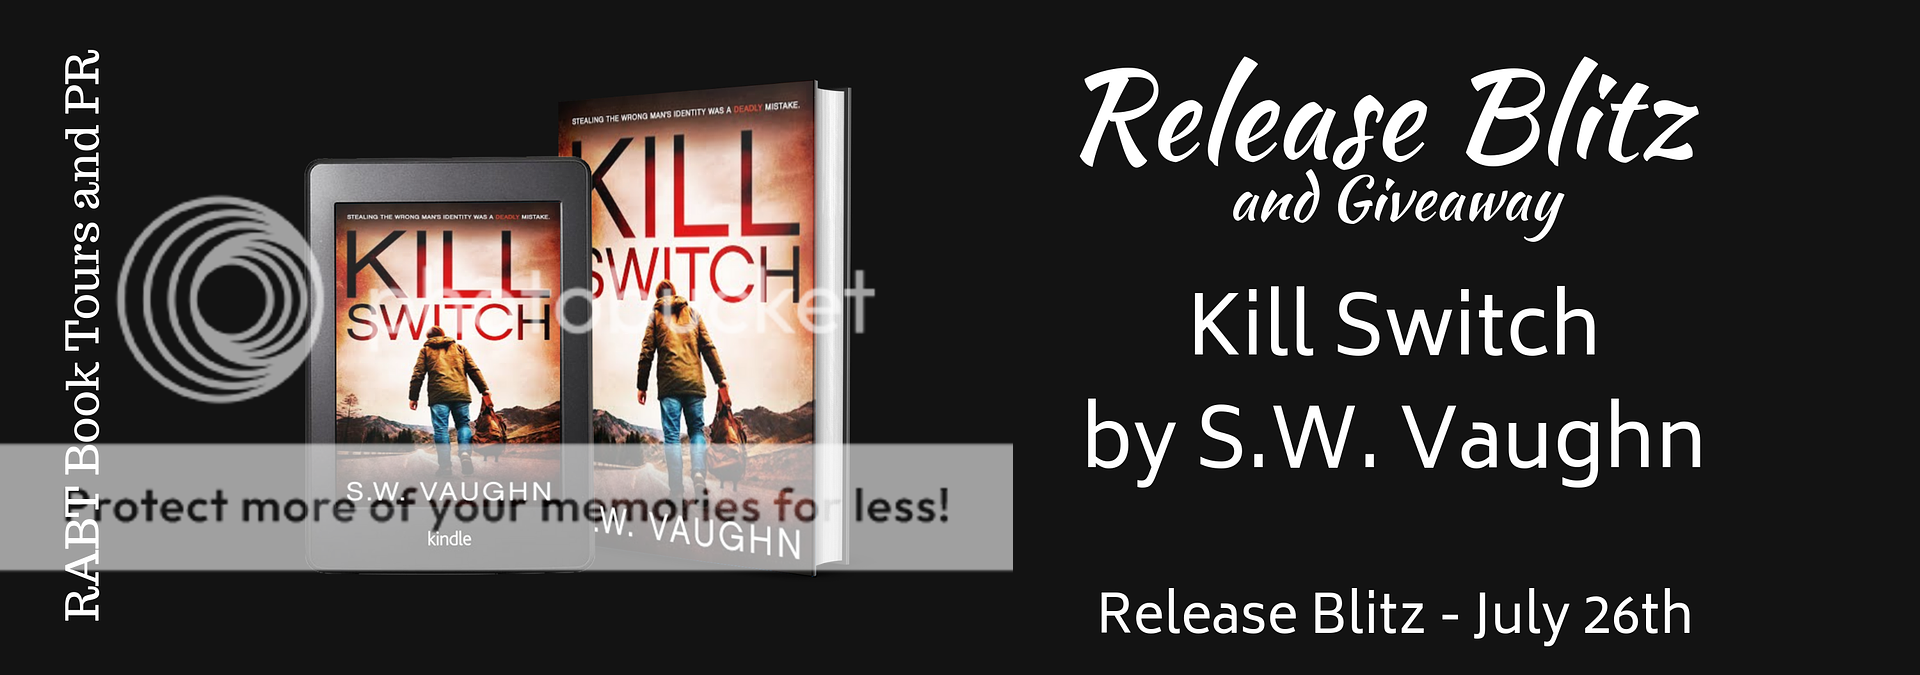 Release Blitz: Kill Switch by S.W. Vaughn #crime #thriller #psychological #releaseday #promo #giveaway #excerpt @RABTBookTours